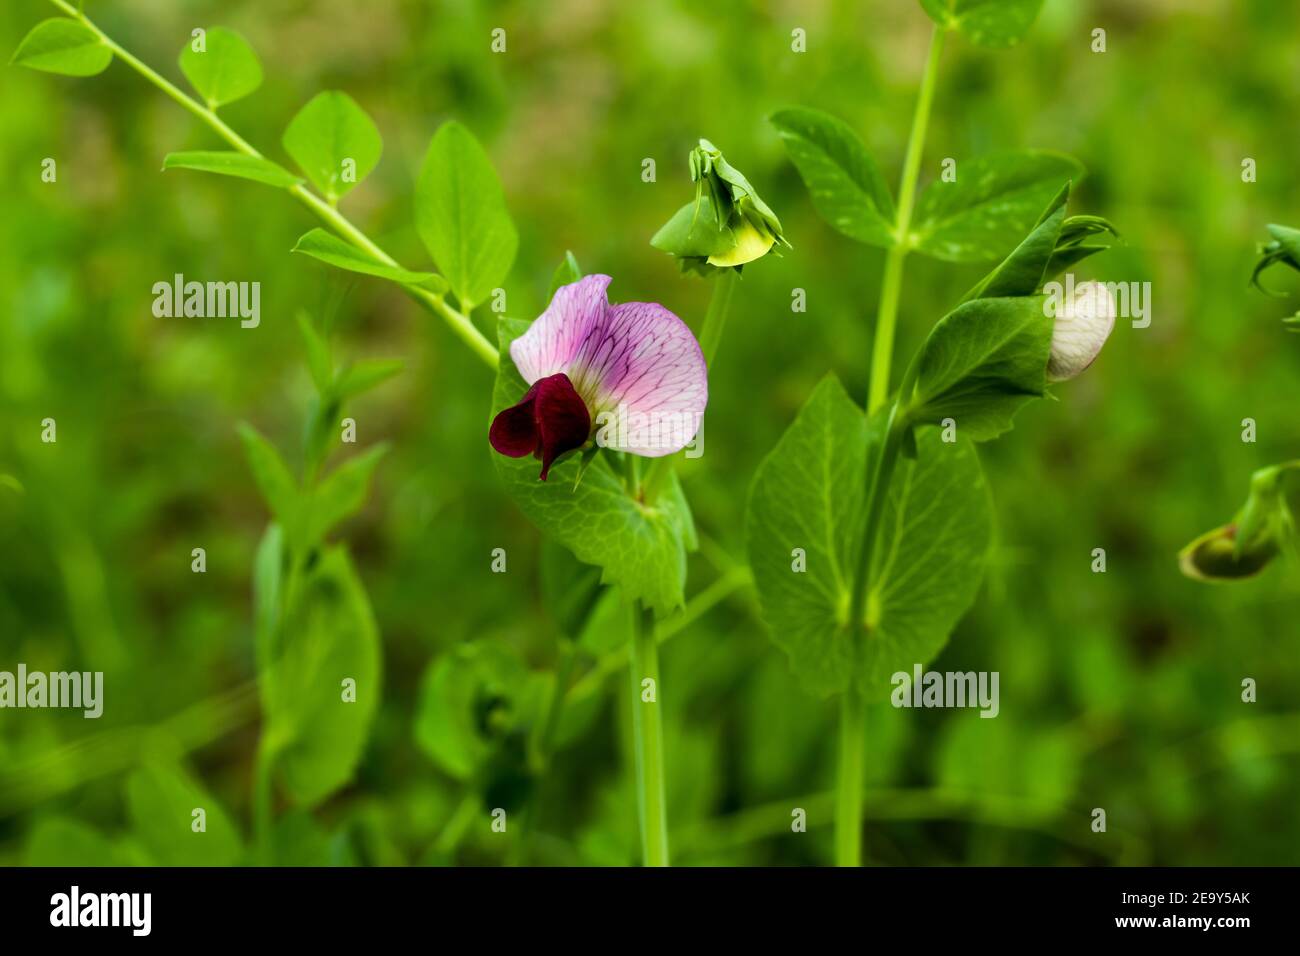 This is the Ideal vegetable or Pea flower or Motor Shuti or Pisum sativum from the Leguminosae family Stock Photo